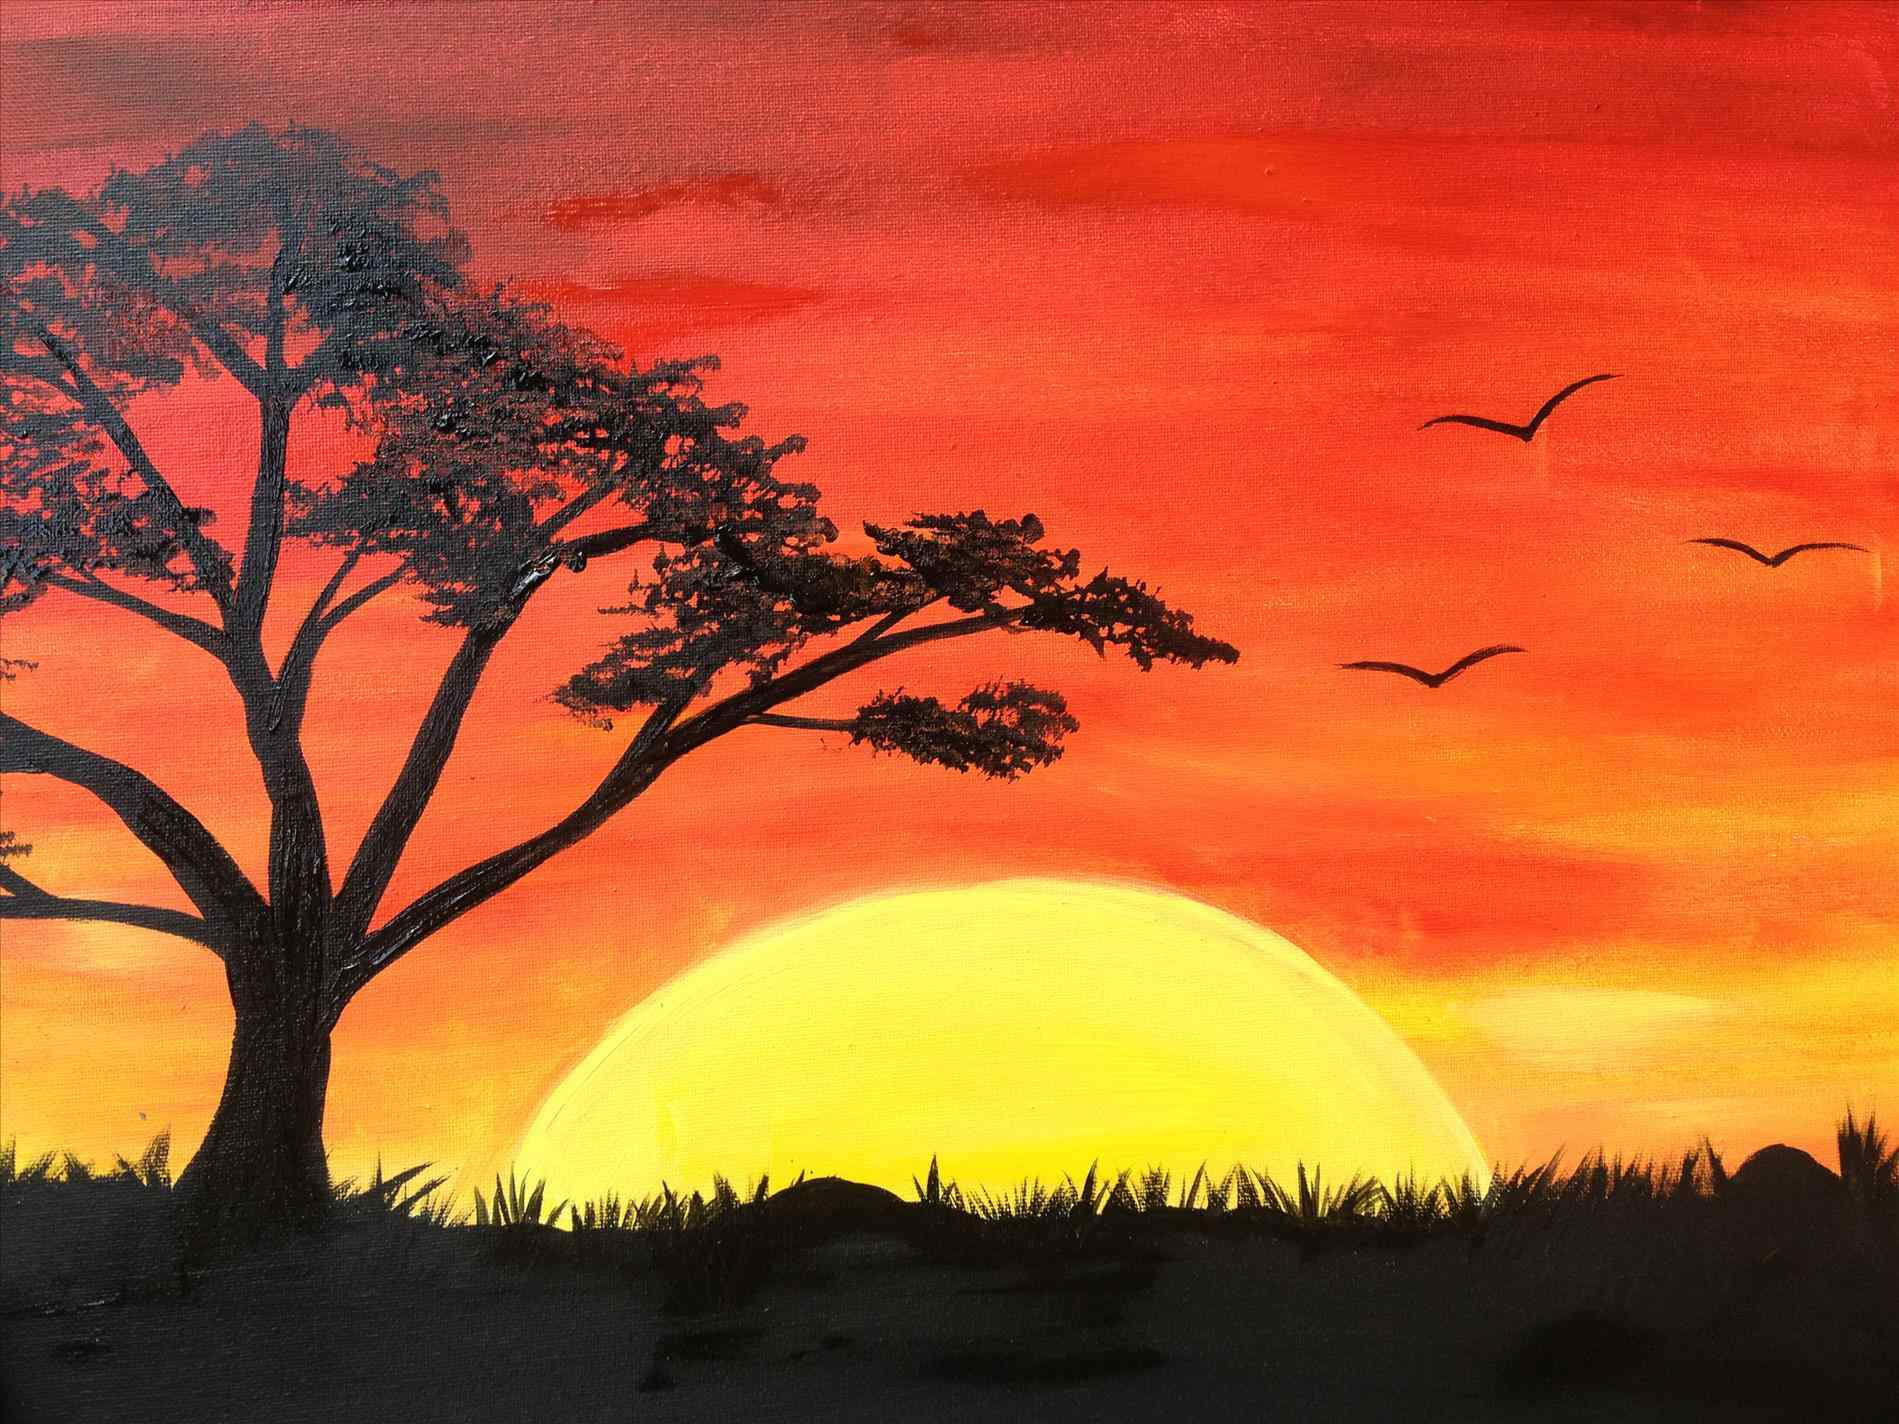 Sunset Drawing Watercolor Easy In this lesson of easy paintings, let